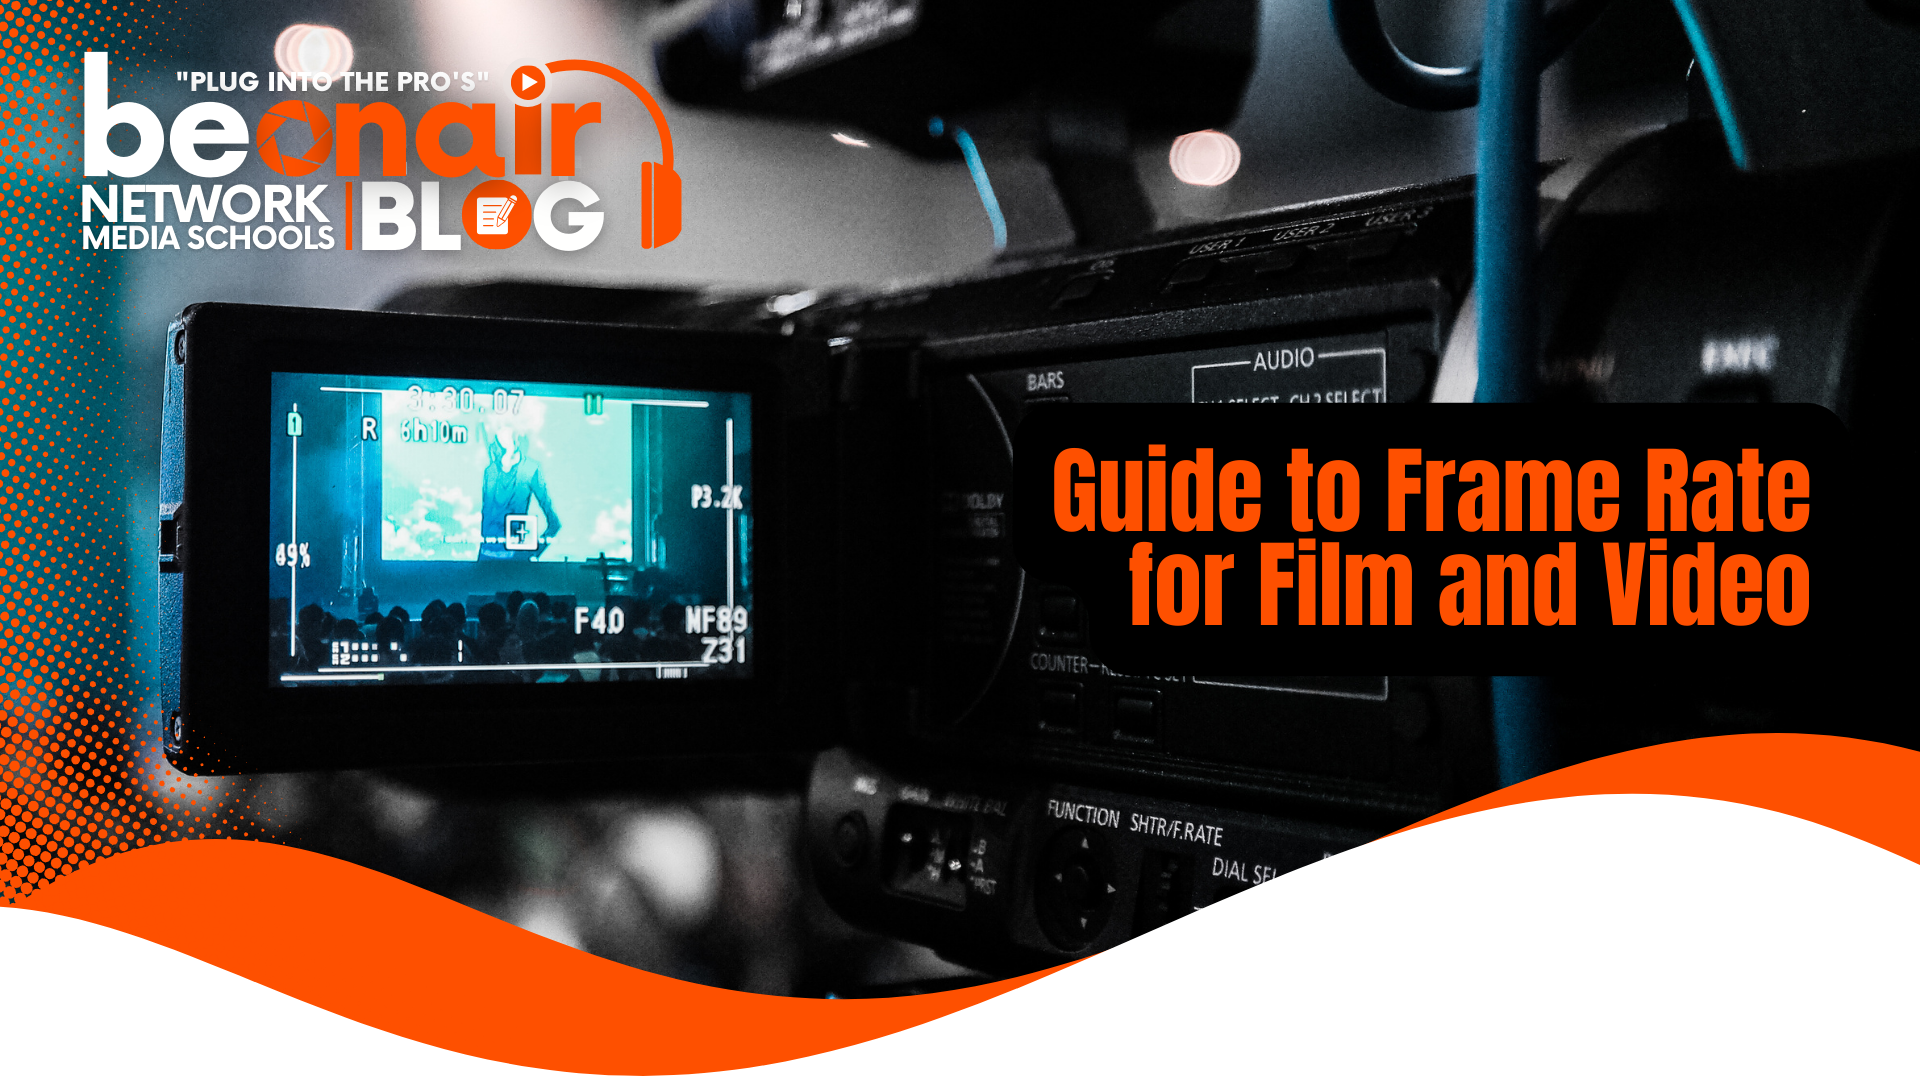 Guide to Frame Rate for Film and Video (1)